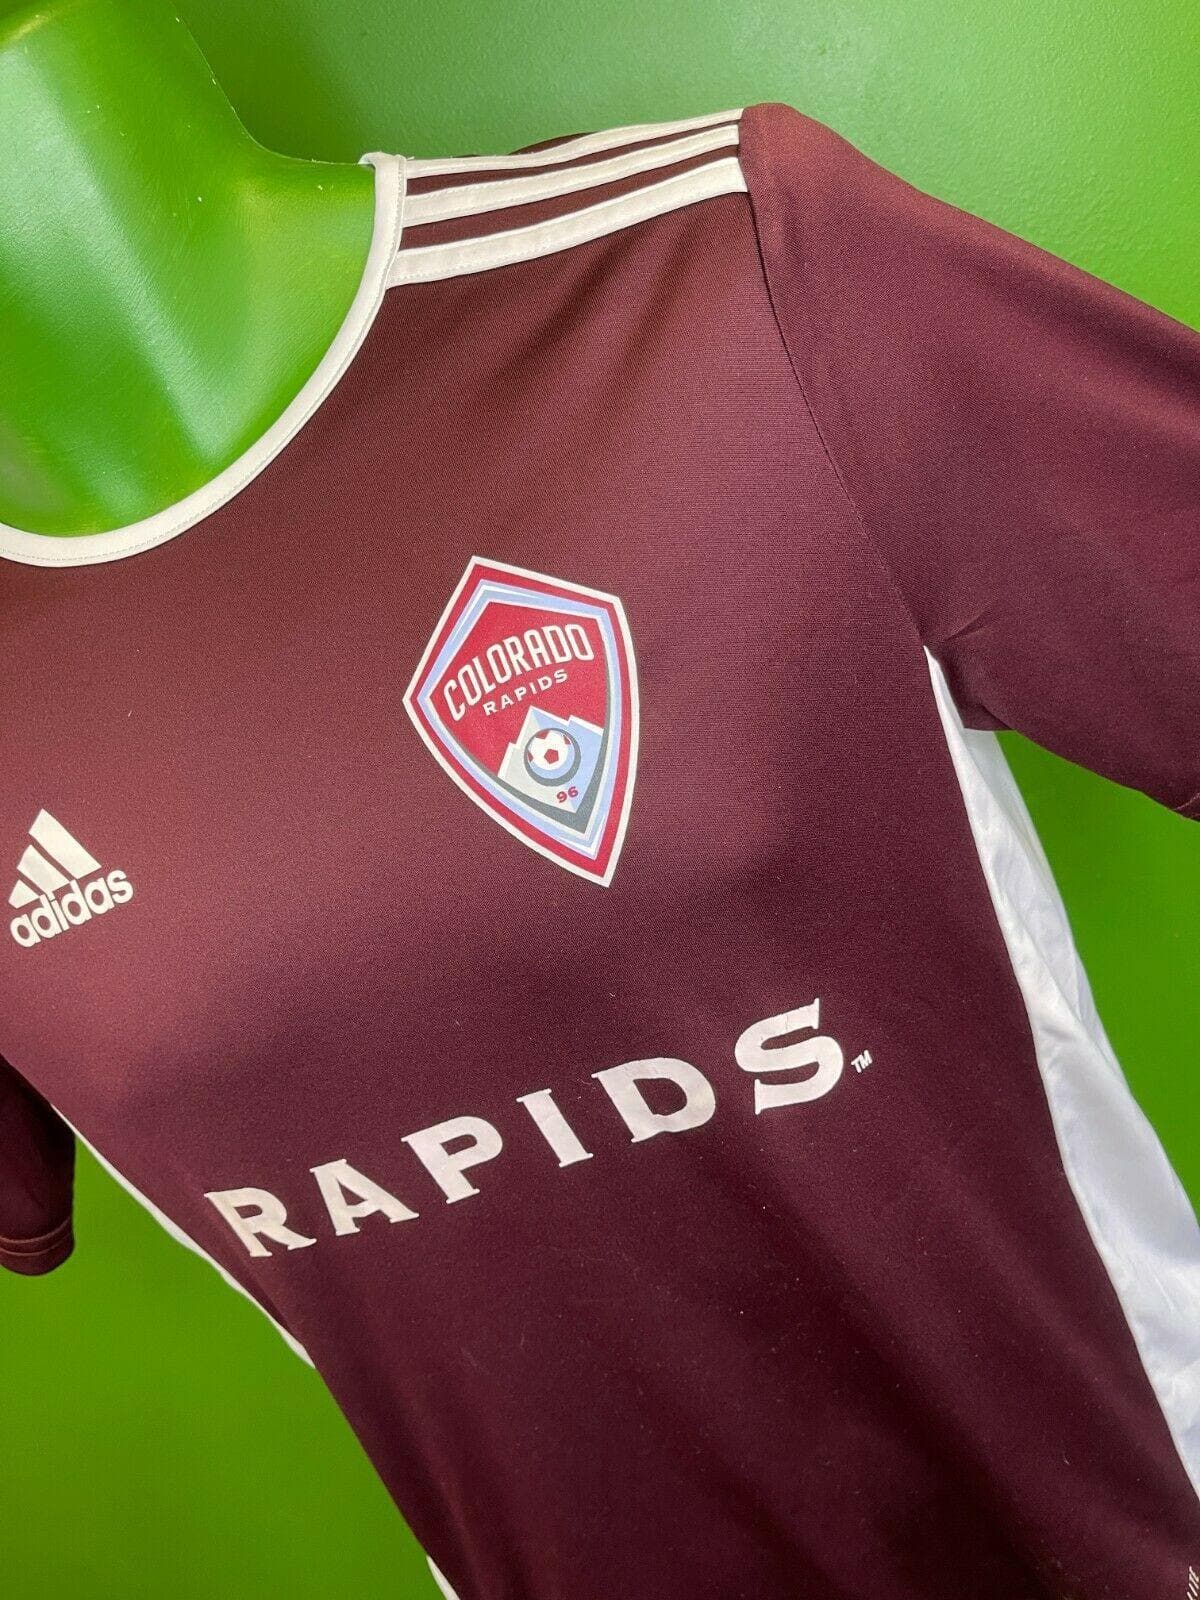 MLS Colorado Rapids #26 Football/Soccer Jersey Youth Large 14-16